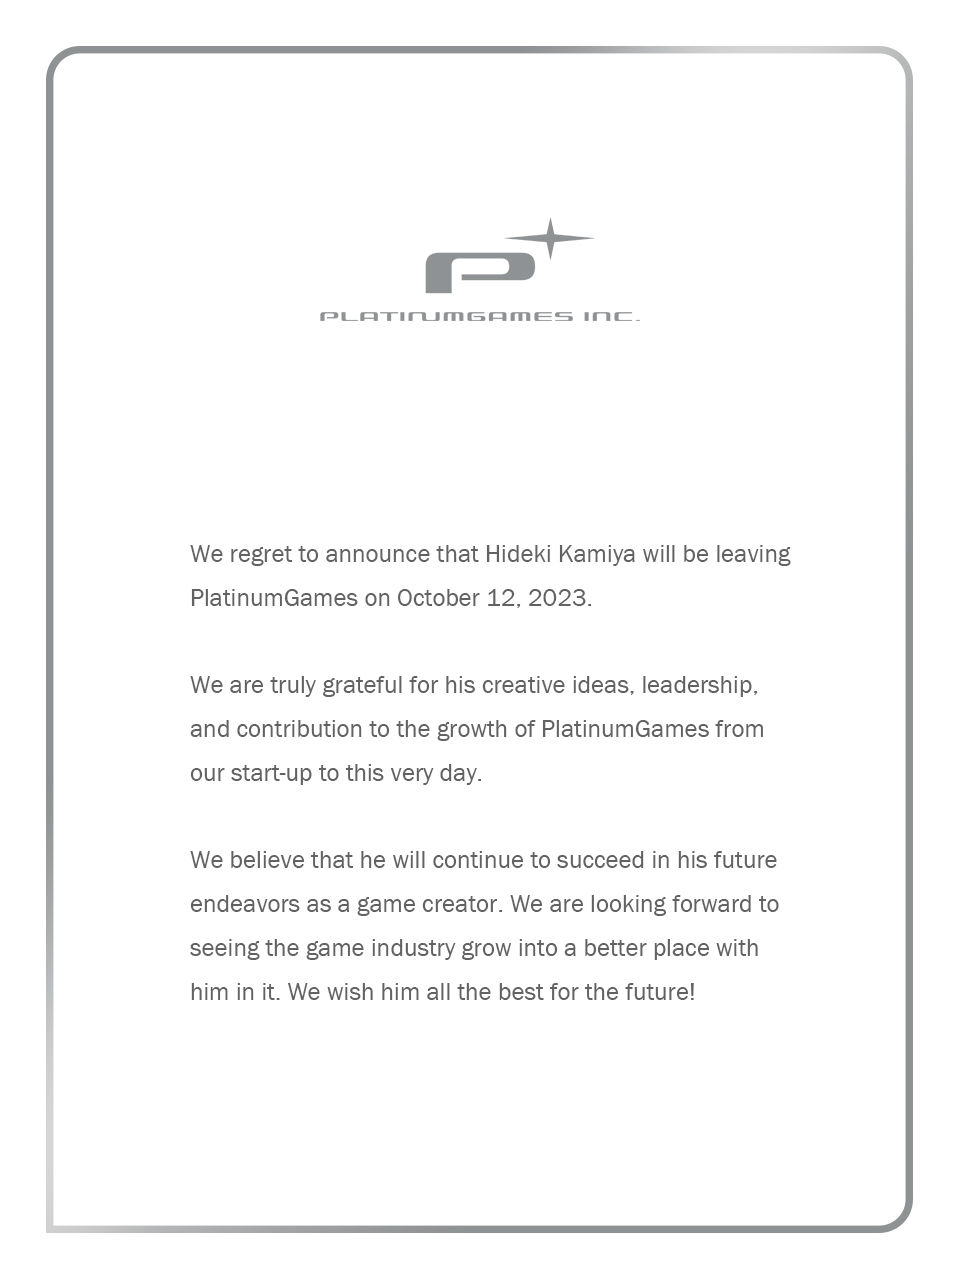 Gray text on a white background with the PlatinumGames logo. The text reads as follows:

We regret to announce that Hideki Kamiya will be leaving PlatinumGames on October 12, 2023.

We are truly grateful for his creative ideas, leadership, and contribution to the growth of PlatinumGames from our start-up to this very day.

We believe that he will continue to succeed in his future endeavors as a game creator. We are looking forward to seeing the game industry grow into a better place with him in it. We wish him all the best for the future! - PlatinumGames Inc.
